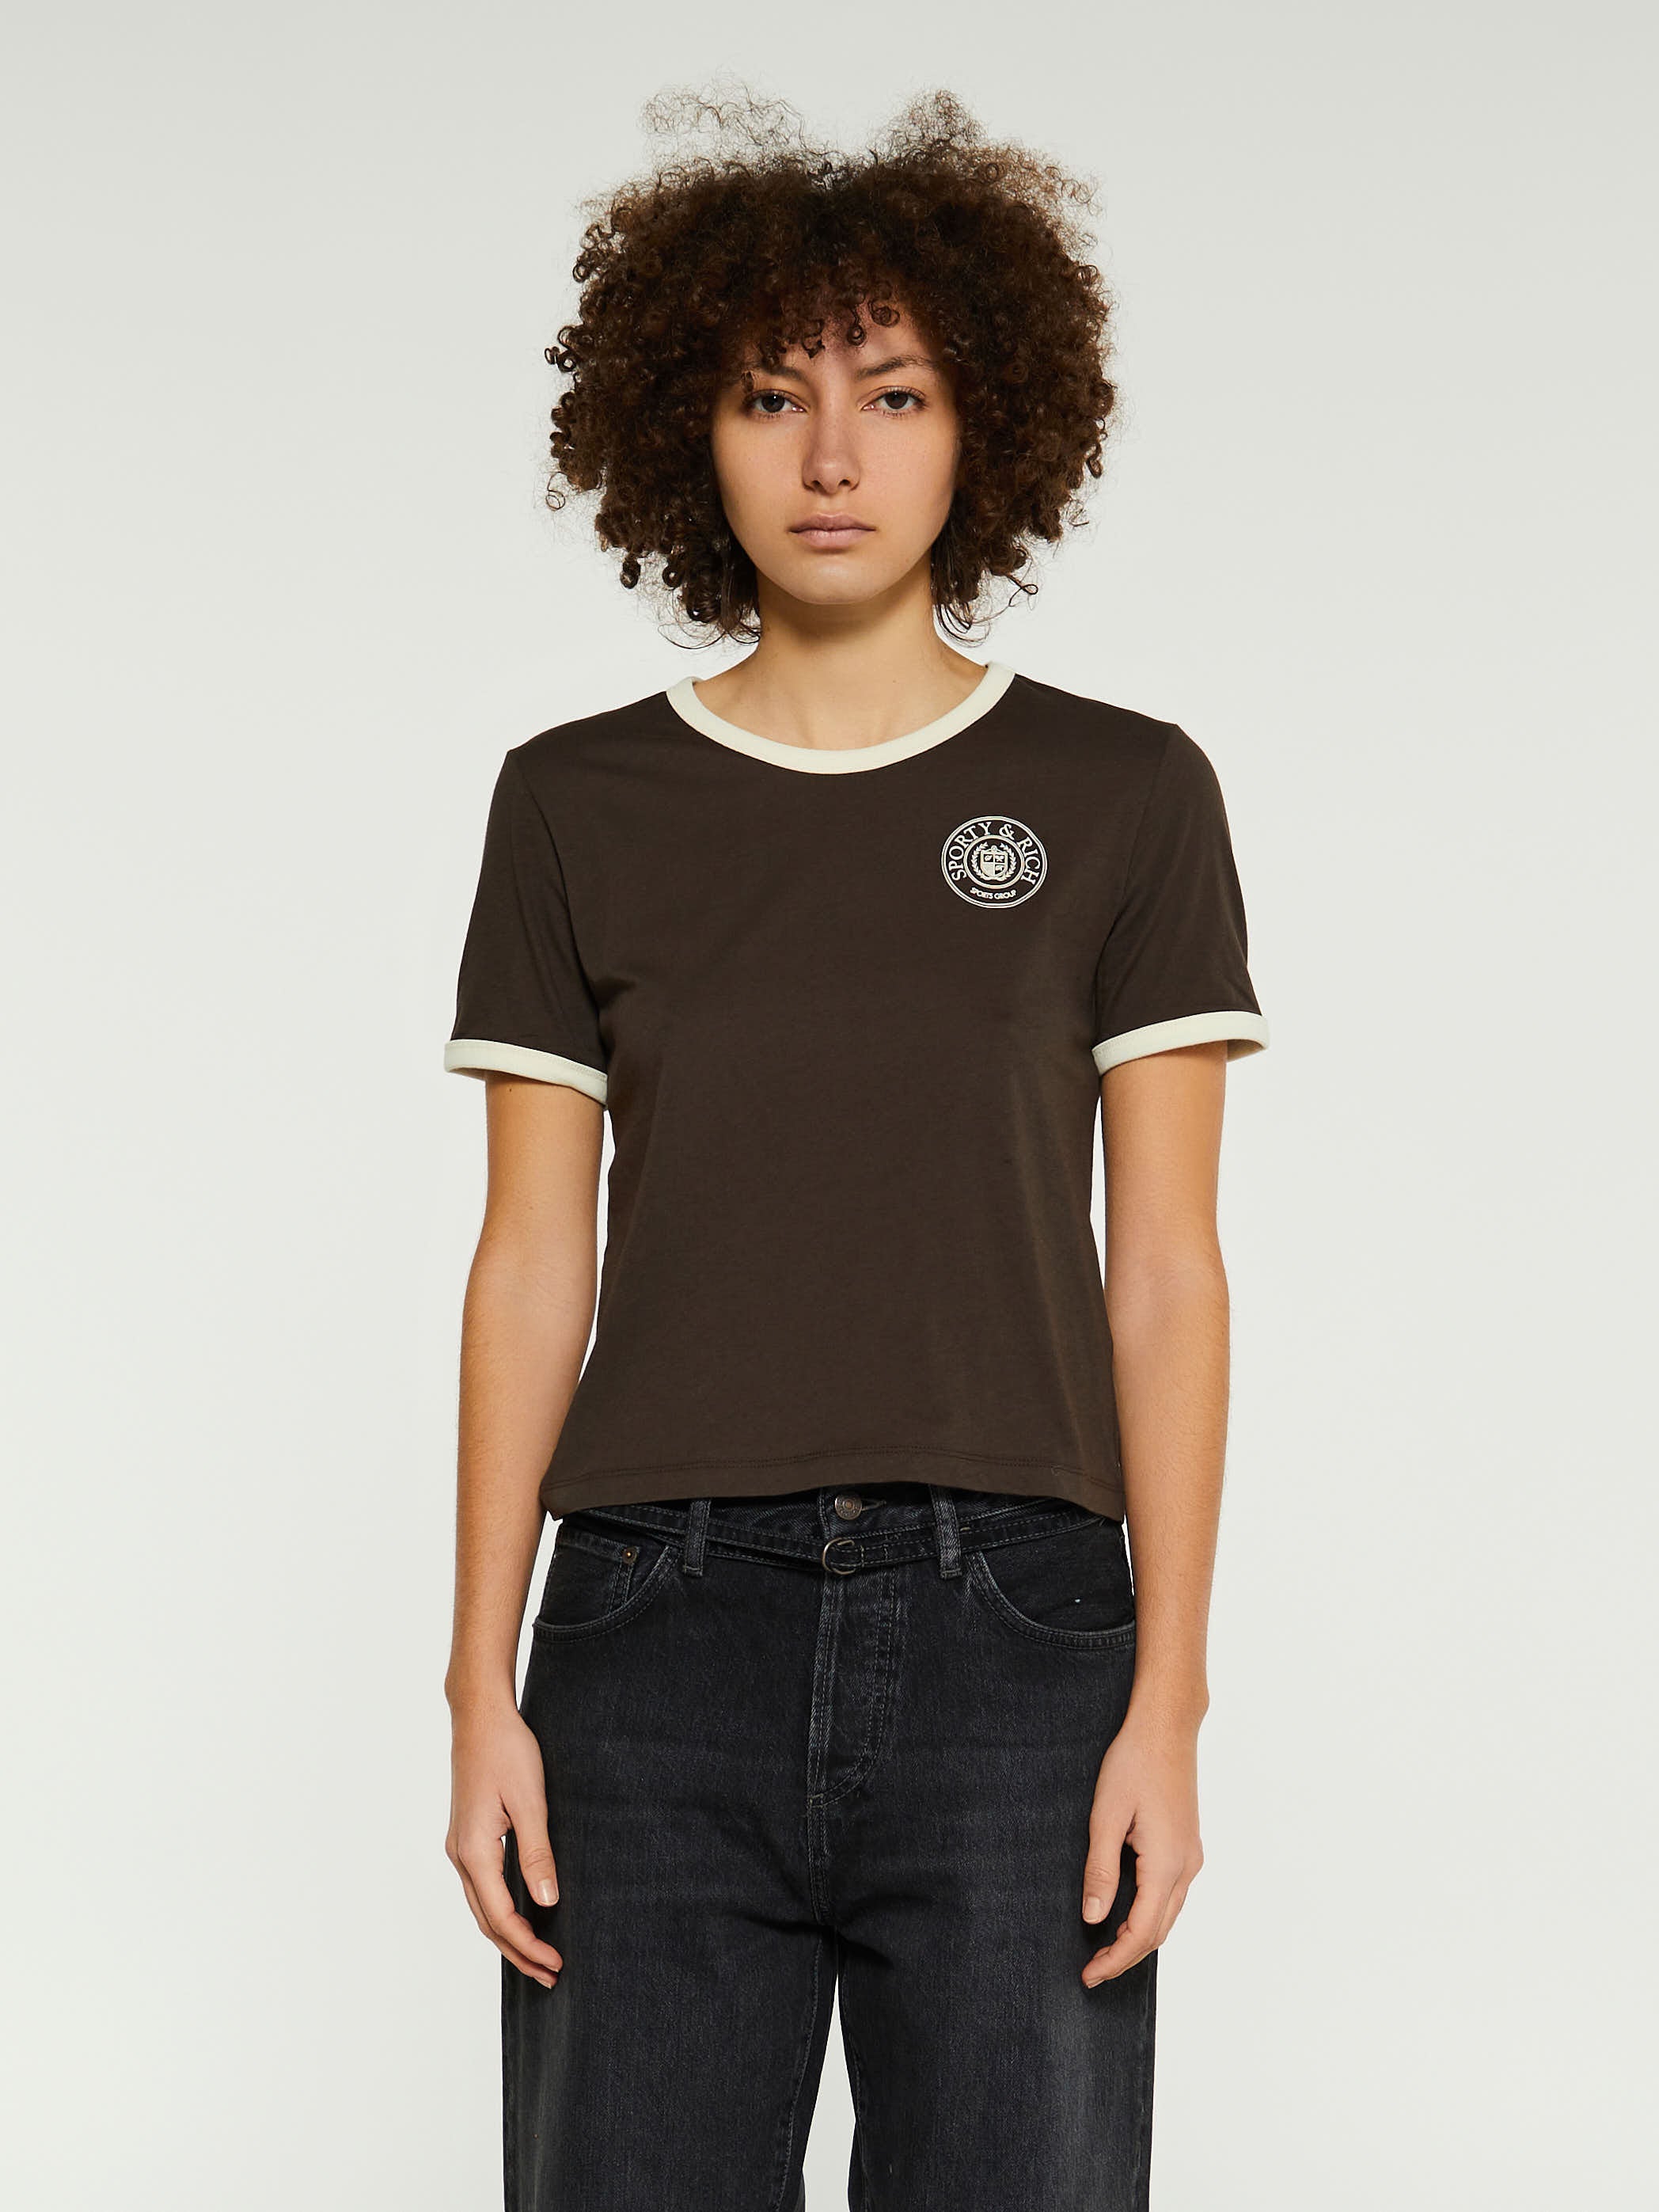 Sporty & Rich - Connecticut Crest Ringer T-Shirt in Chocolate